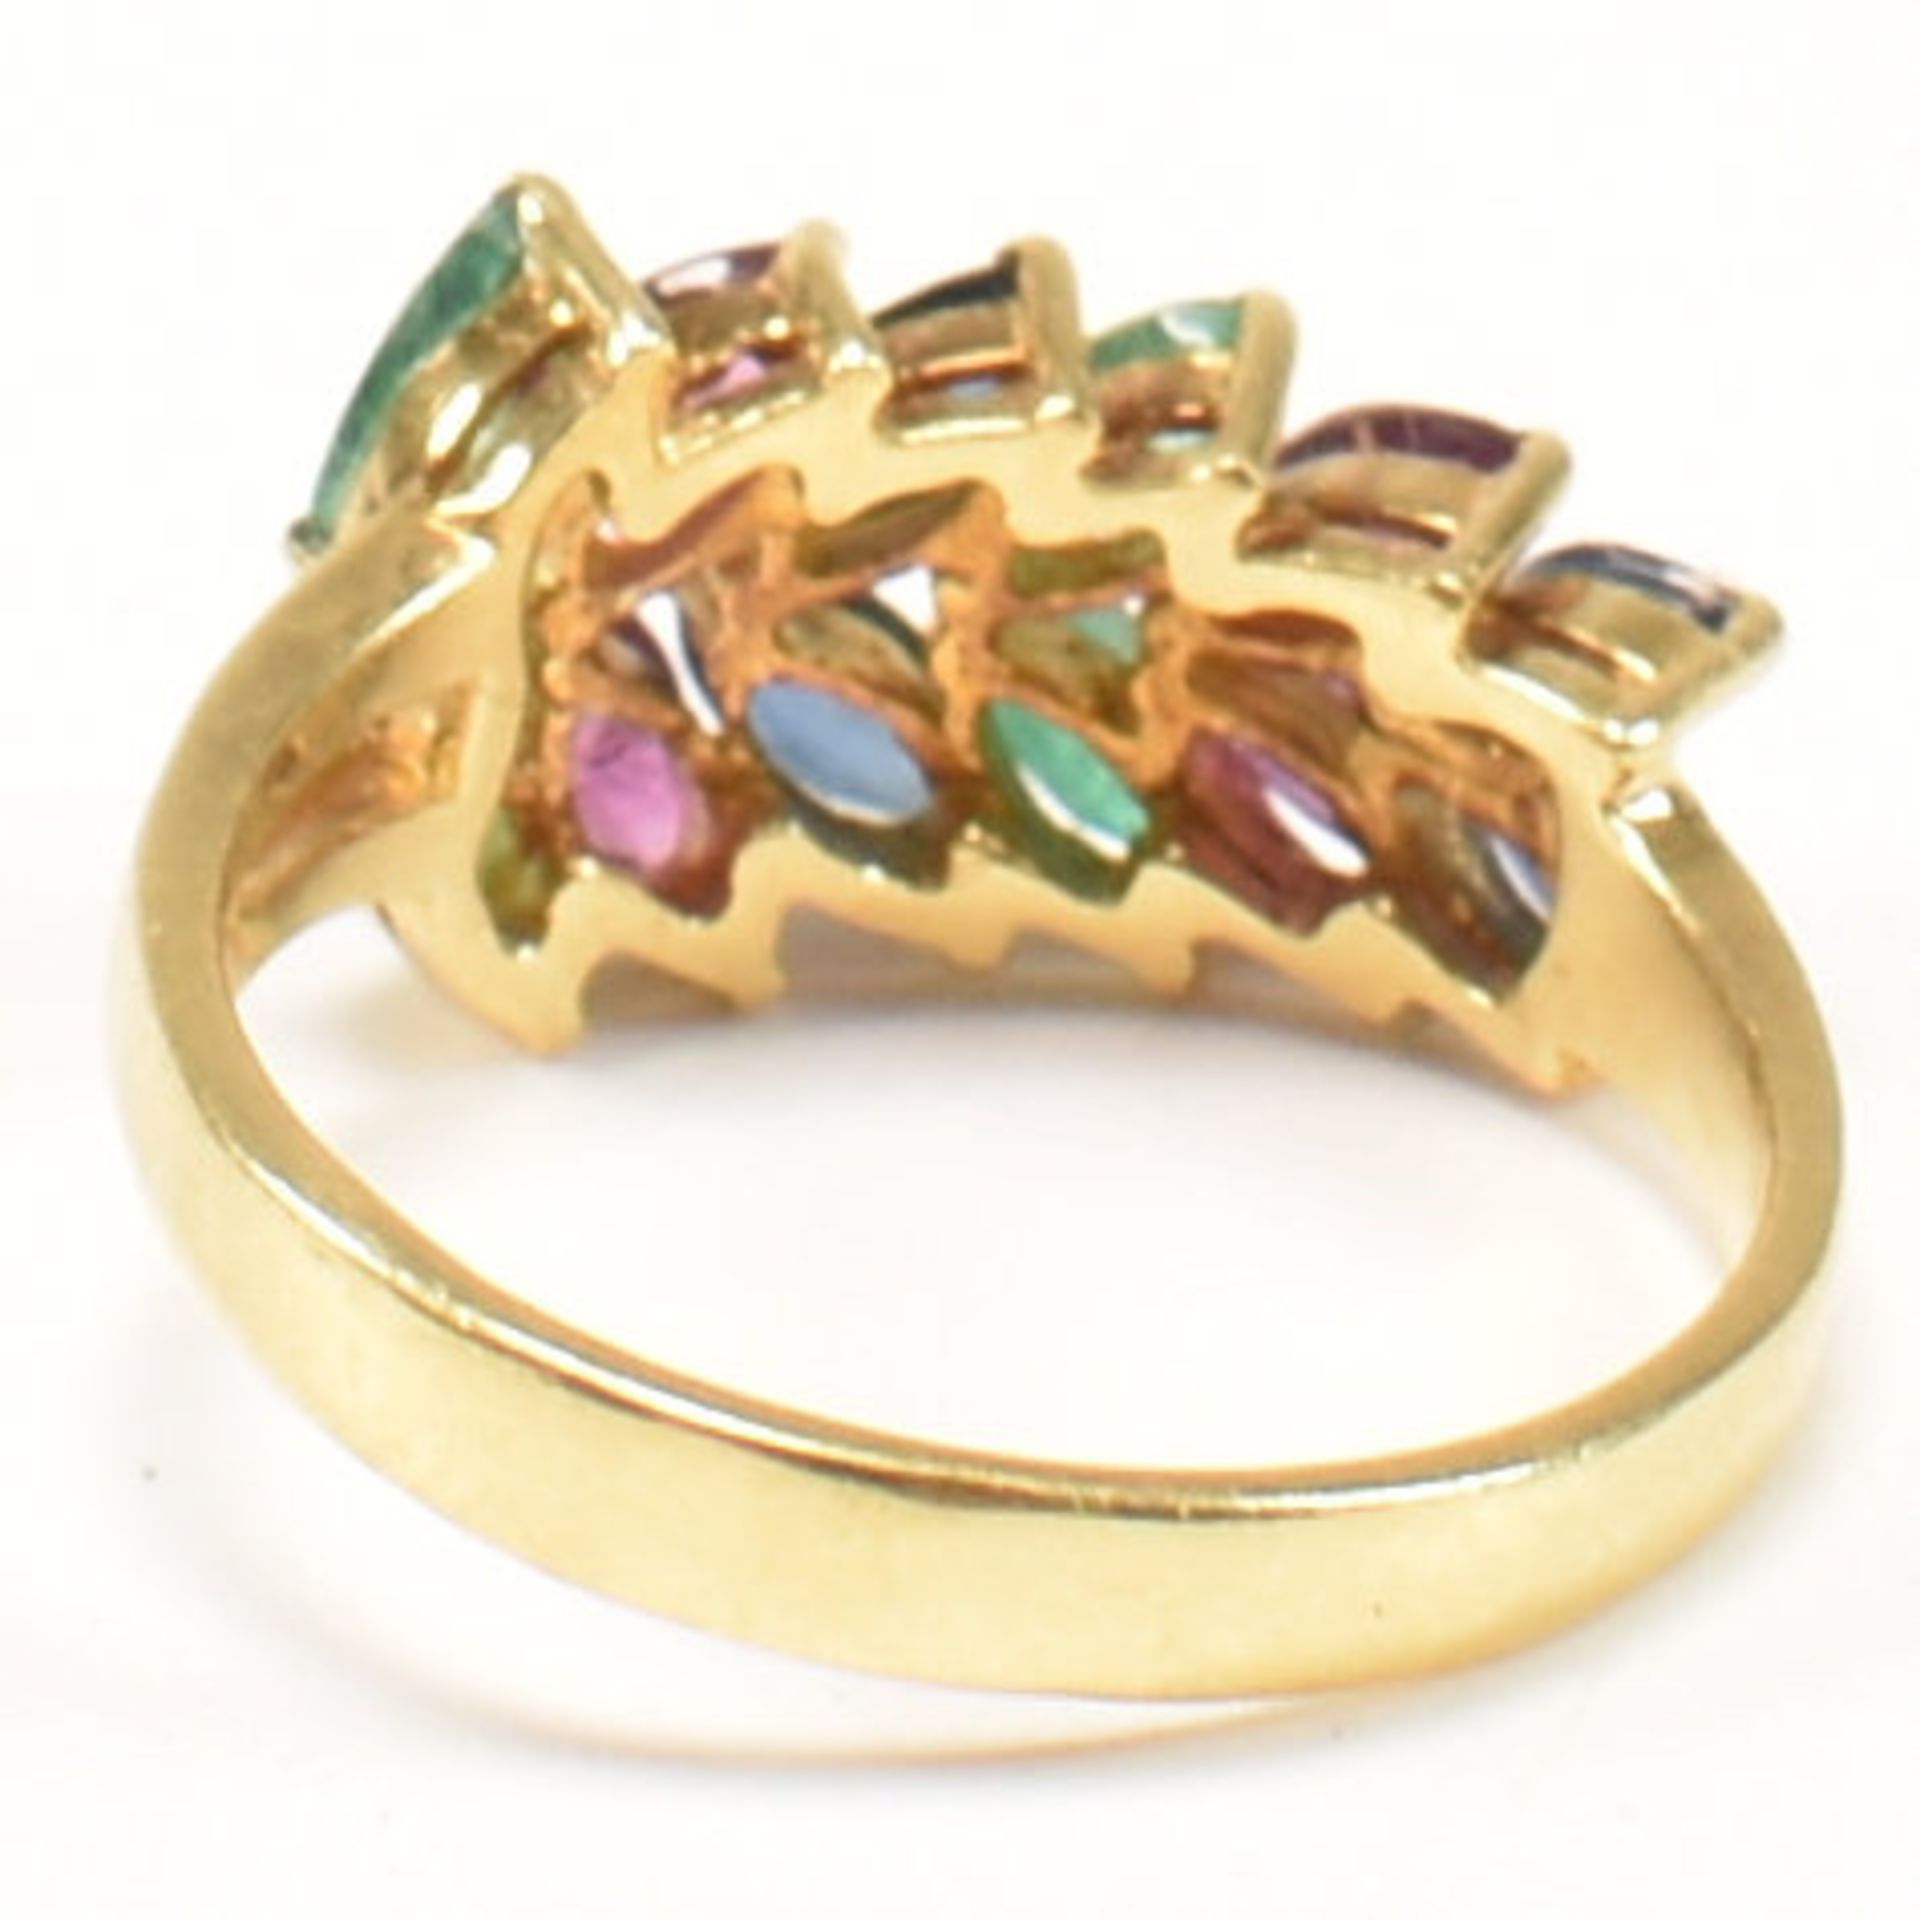 18CT GOLD EMERALD & SAPPHIRE & RUBY CLUSTER RING - Image 6 of 9